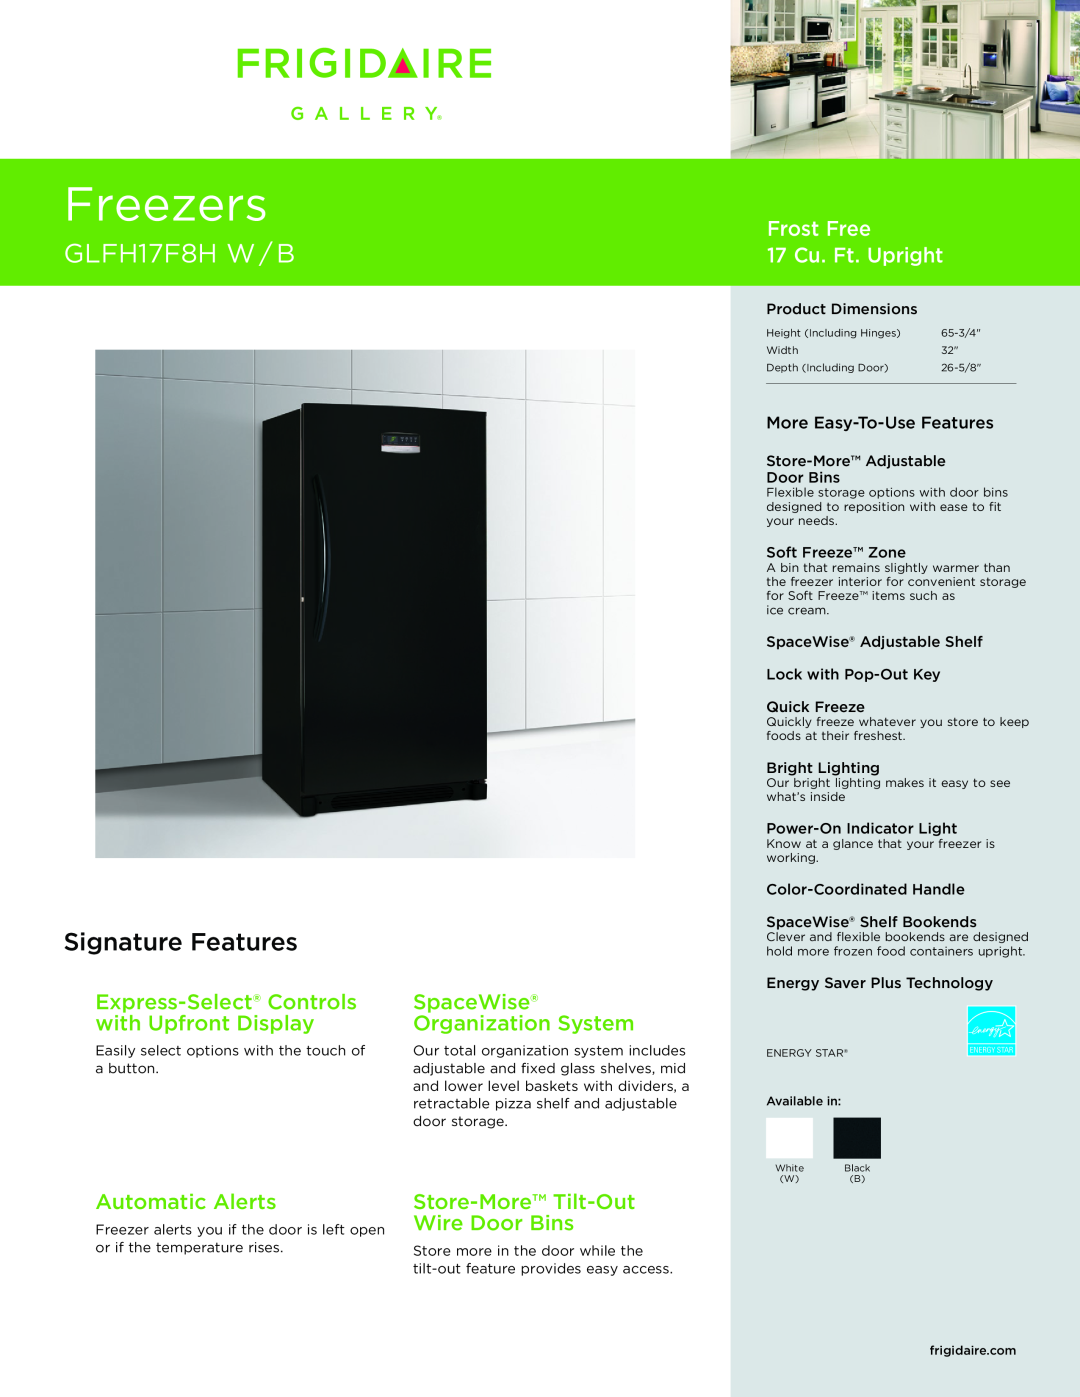 Frigidaire dimensions Freezers, GLFH17F8H W / B, Signature Features, Frost Free 17 Cu. Ft. Upright, Automatic Alerts 